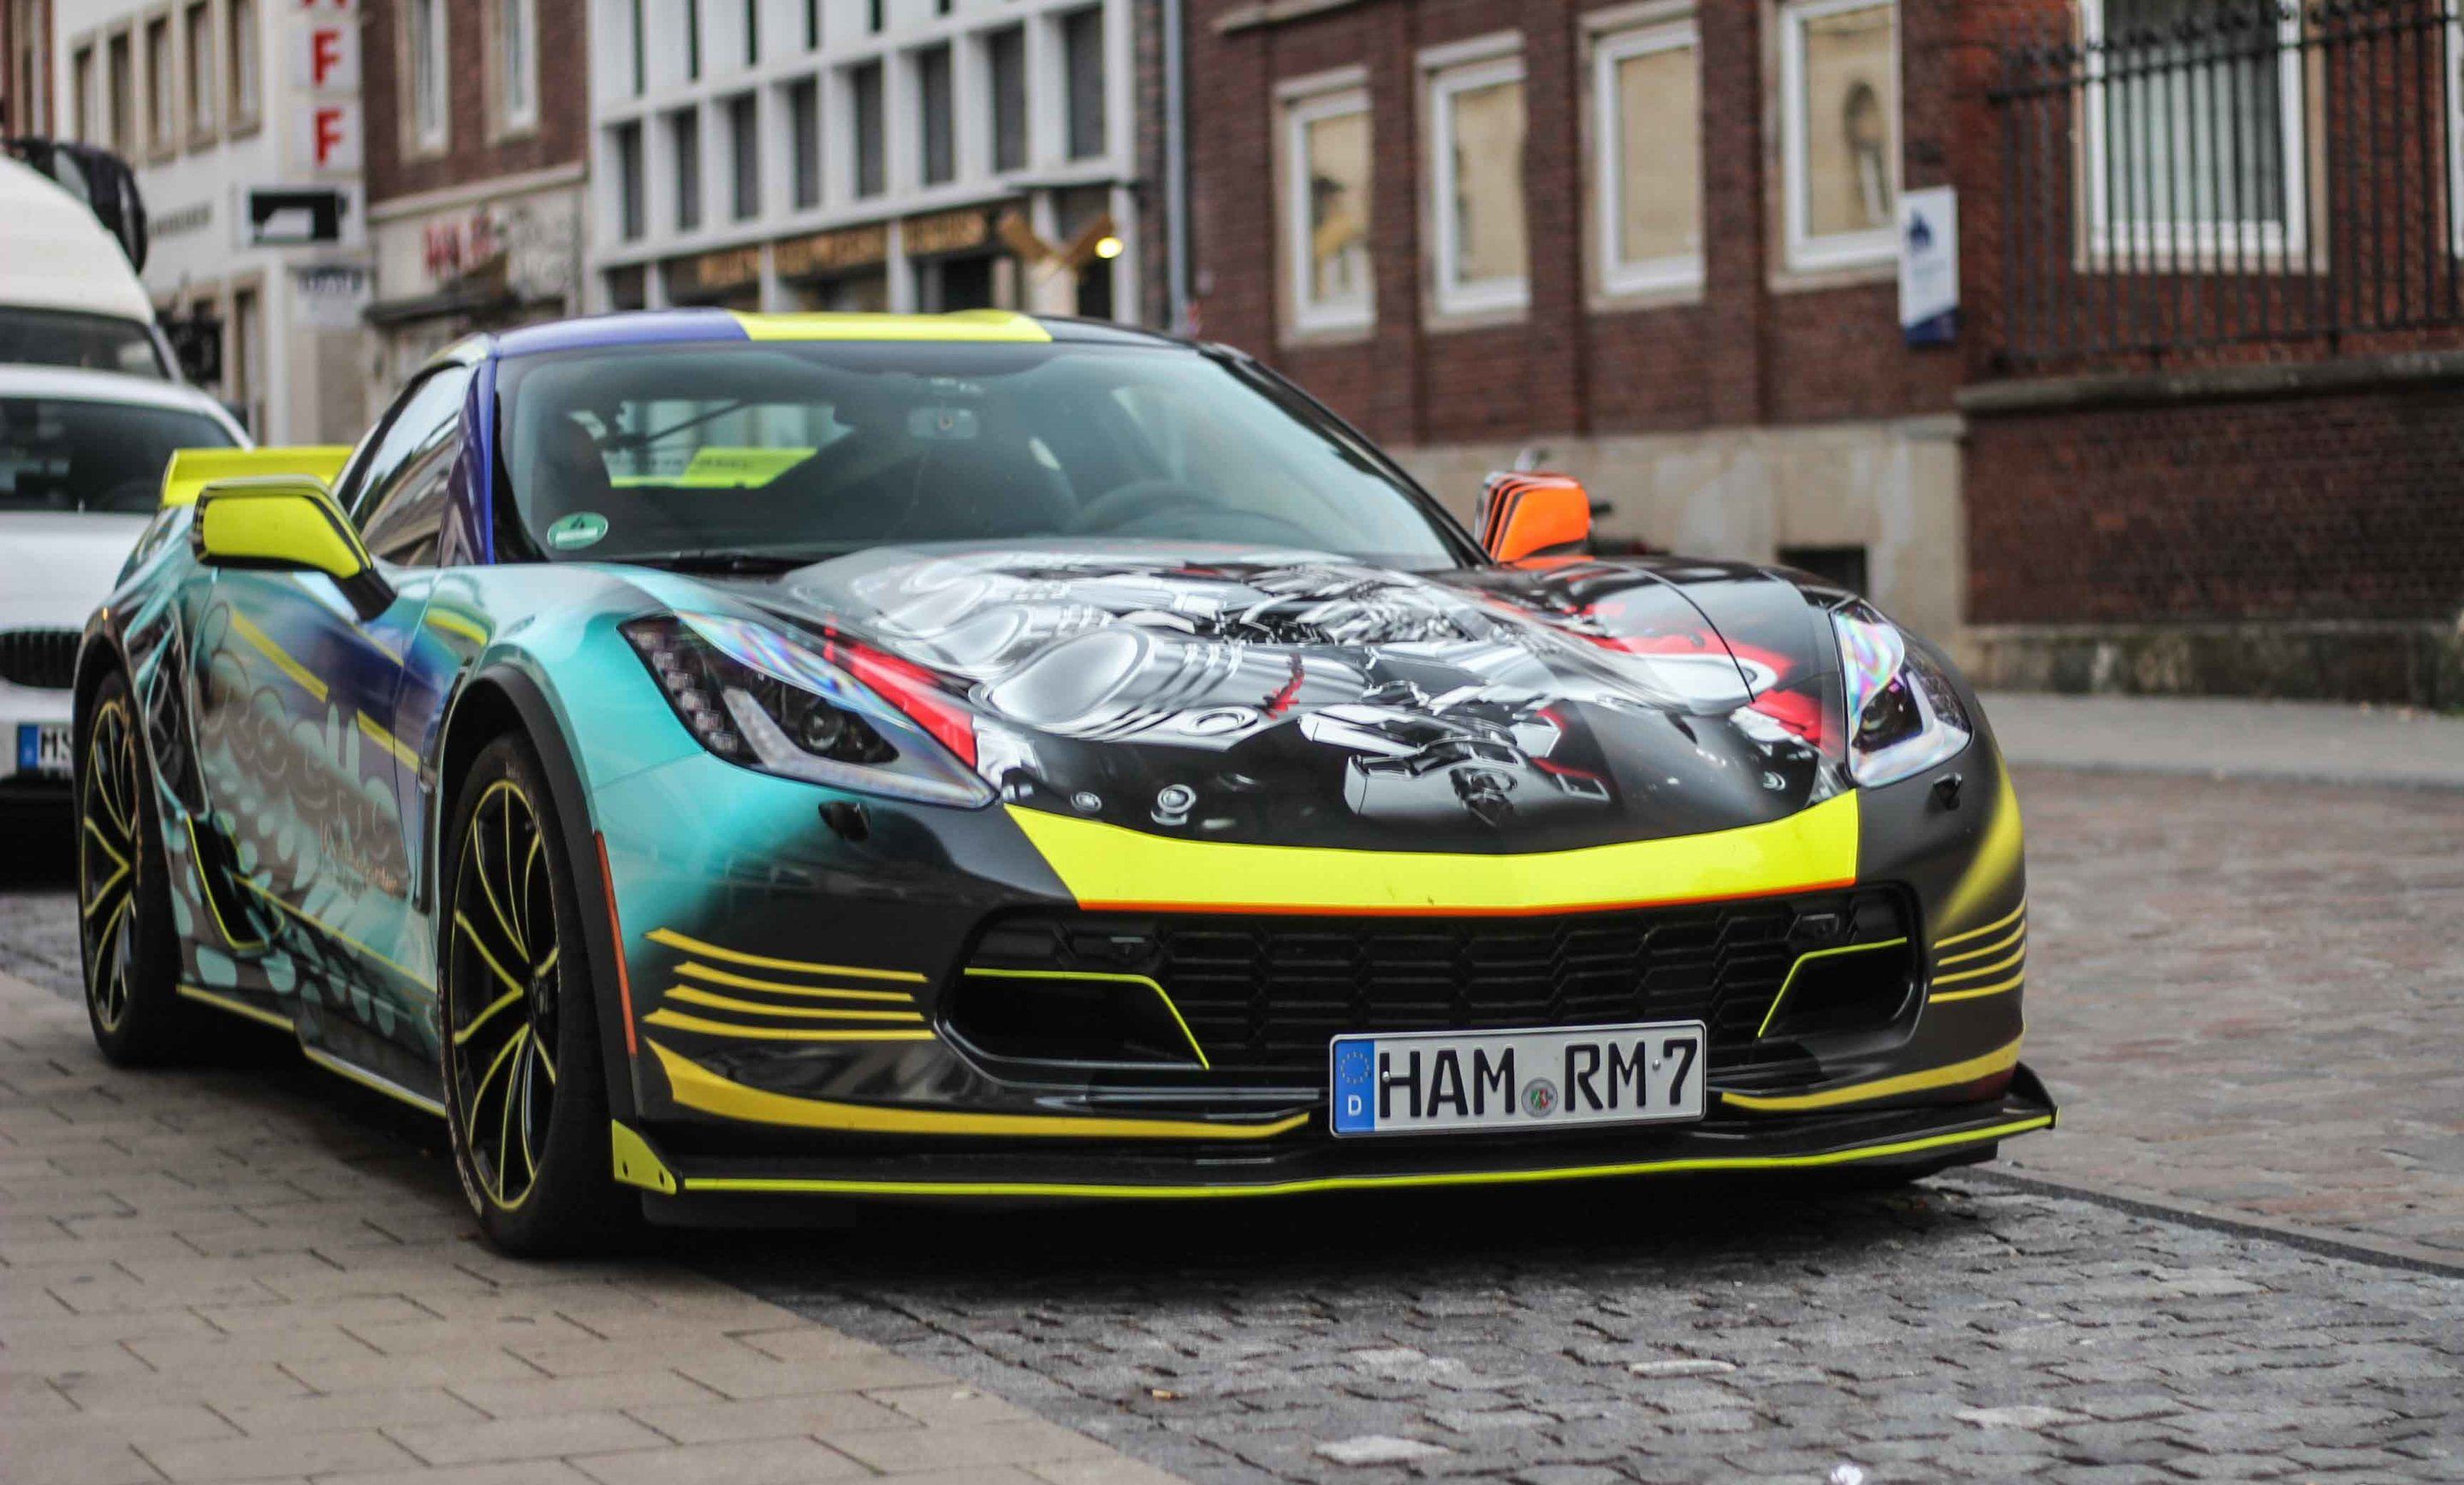 There's a Chevrolet Corvette C7 Grand Sport underneath that technicolor throw-up